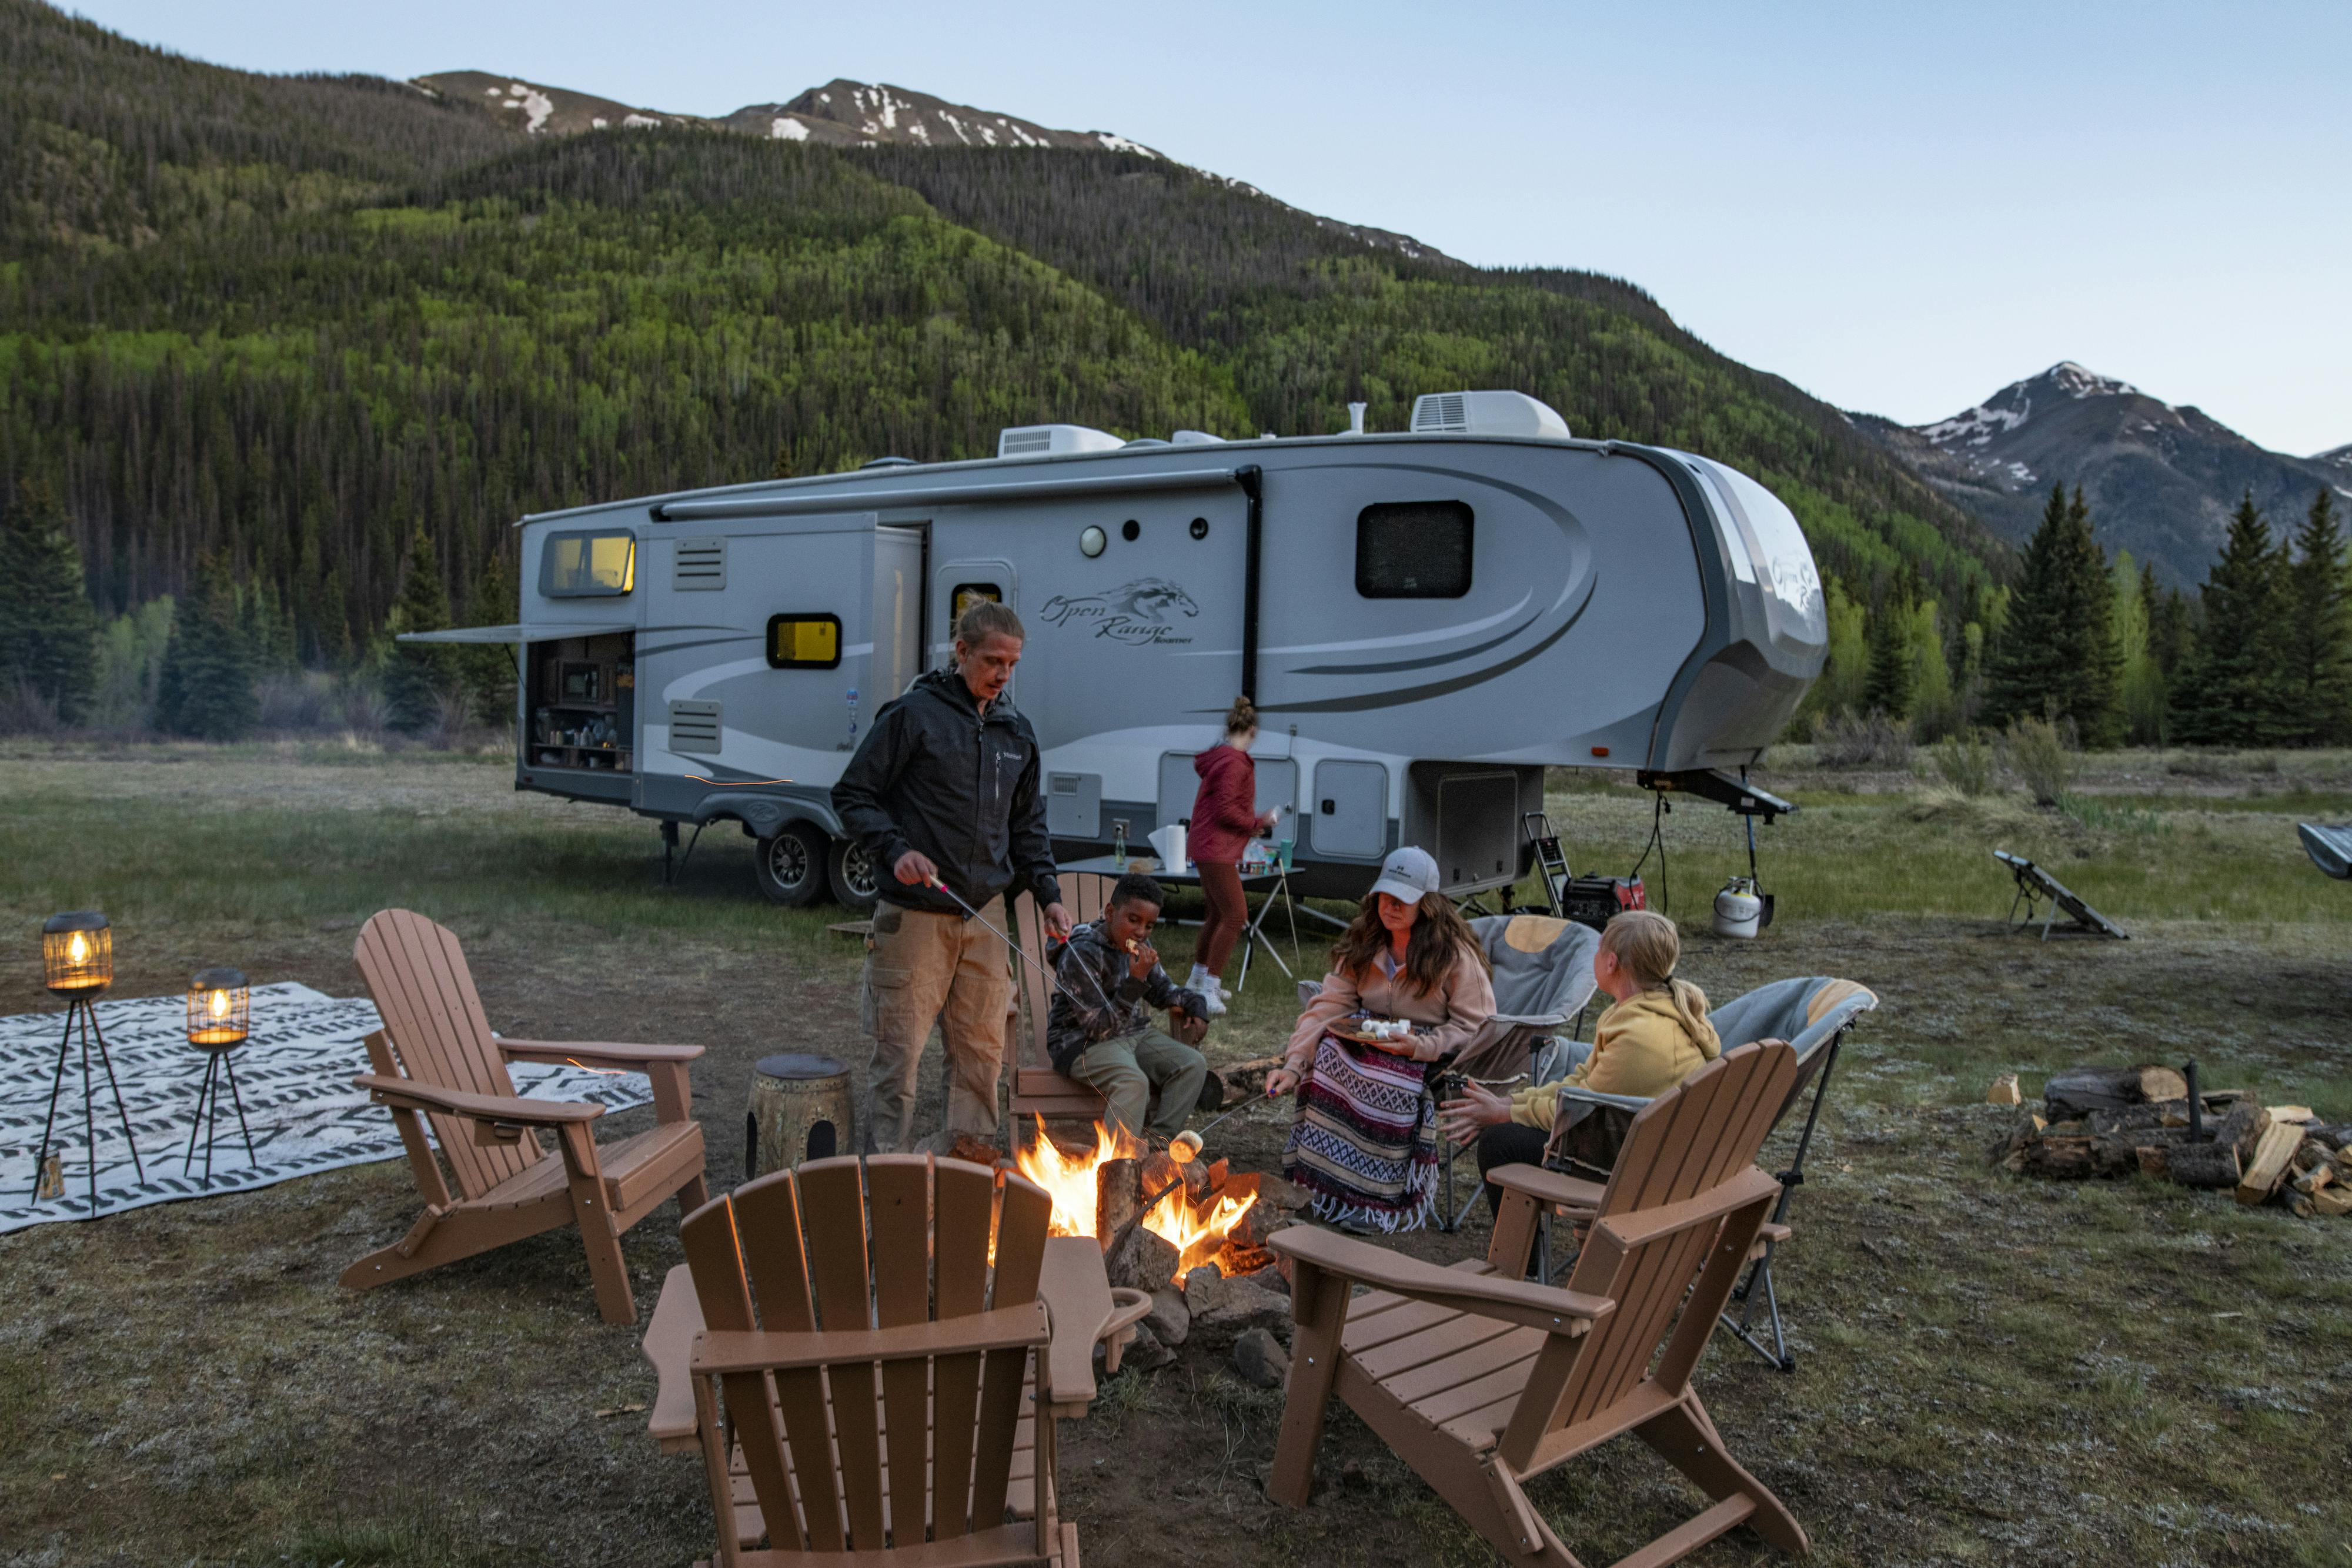 The Carew family sitting around a campfire roasting marshmallows in front of their RV at dusk